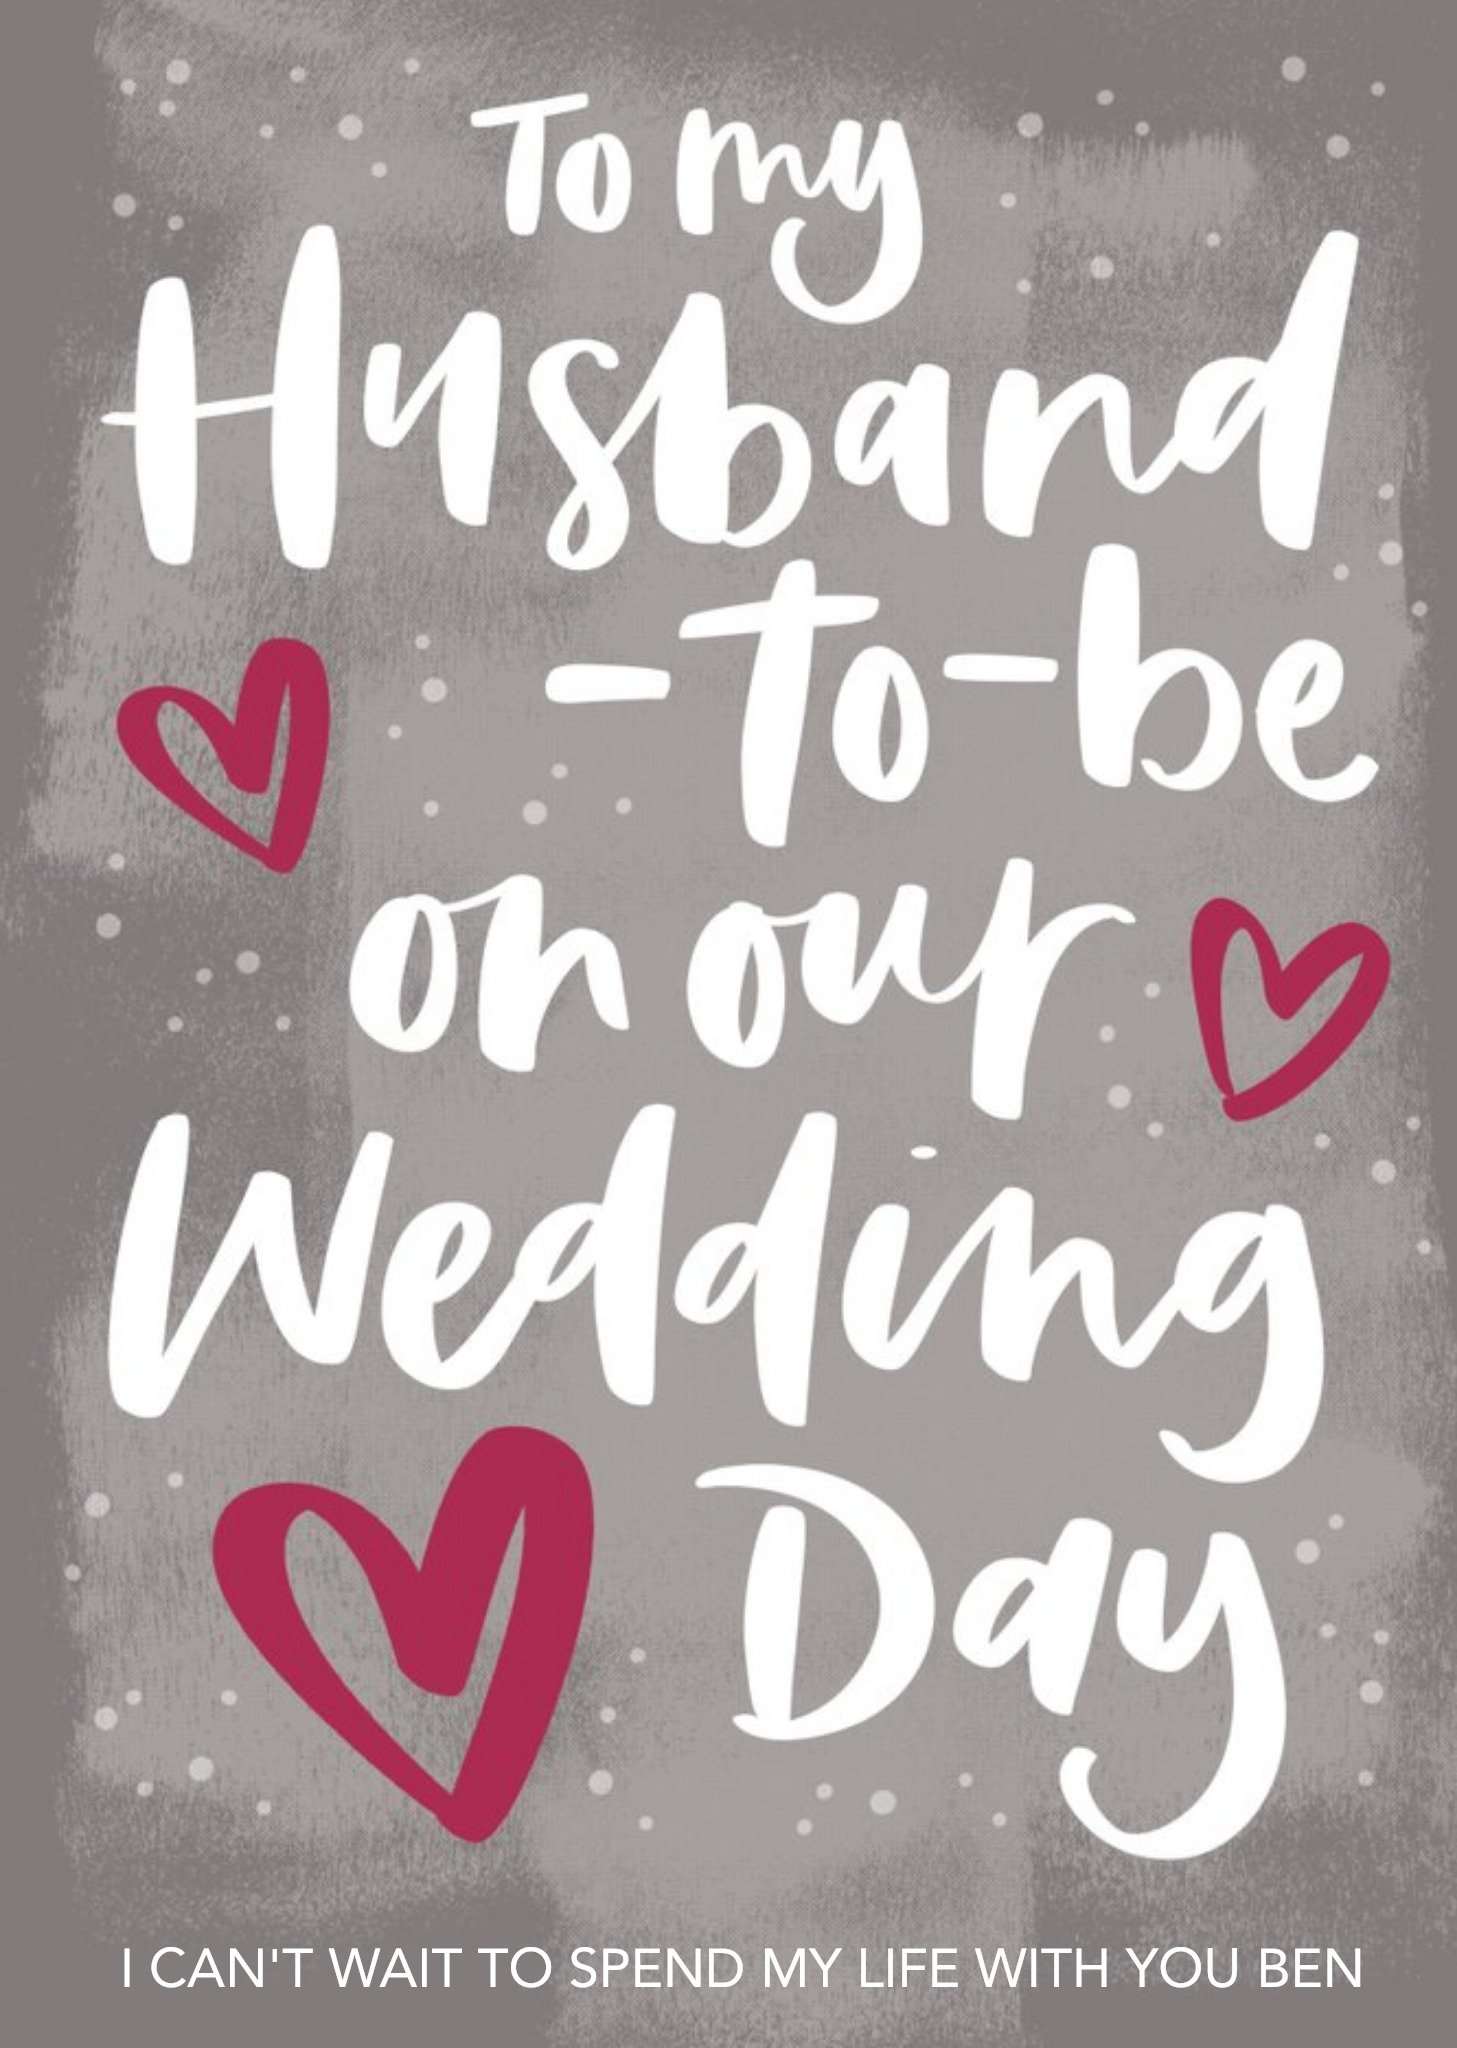 Moonpig Cute Wedding Day Card To My Husband To Be On Our Wedding Day, Large